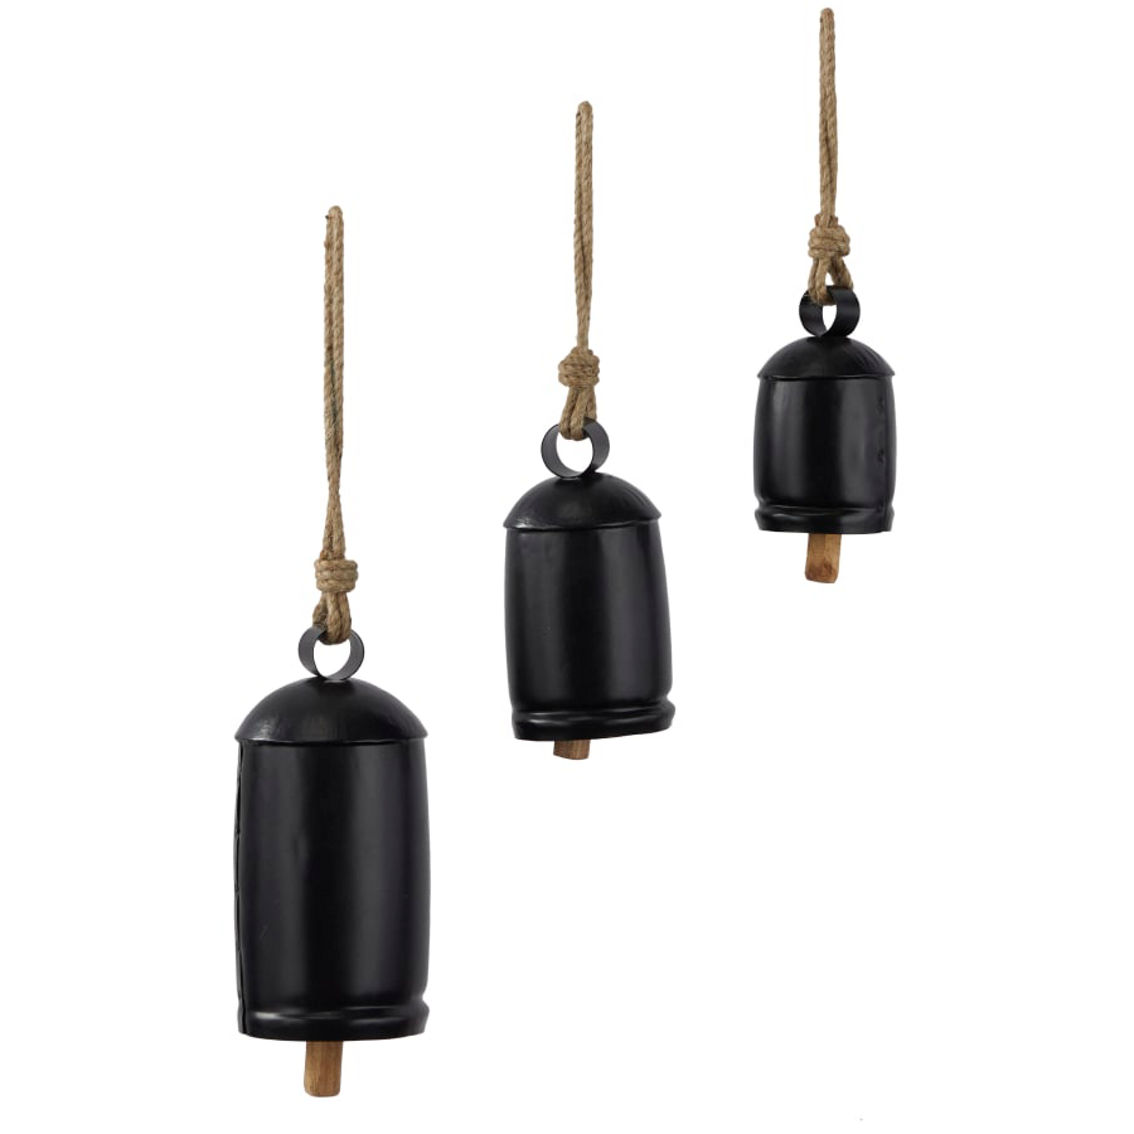 Morgan Hill Home Rustic Gold Metal Decorative Cow Bell Set - Image 3 of 5